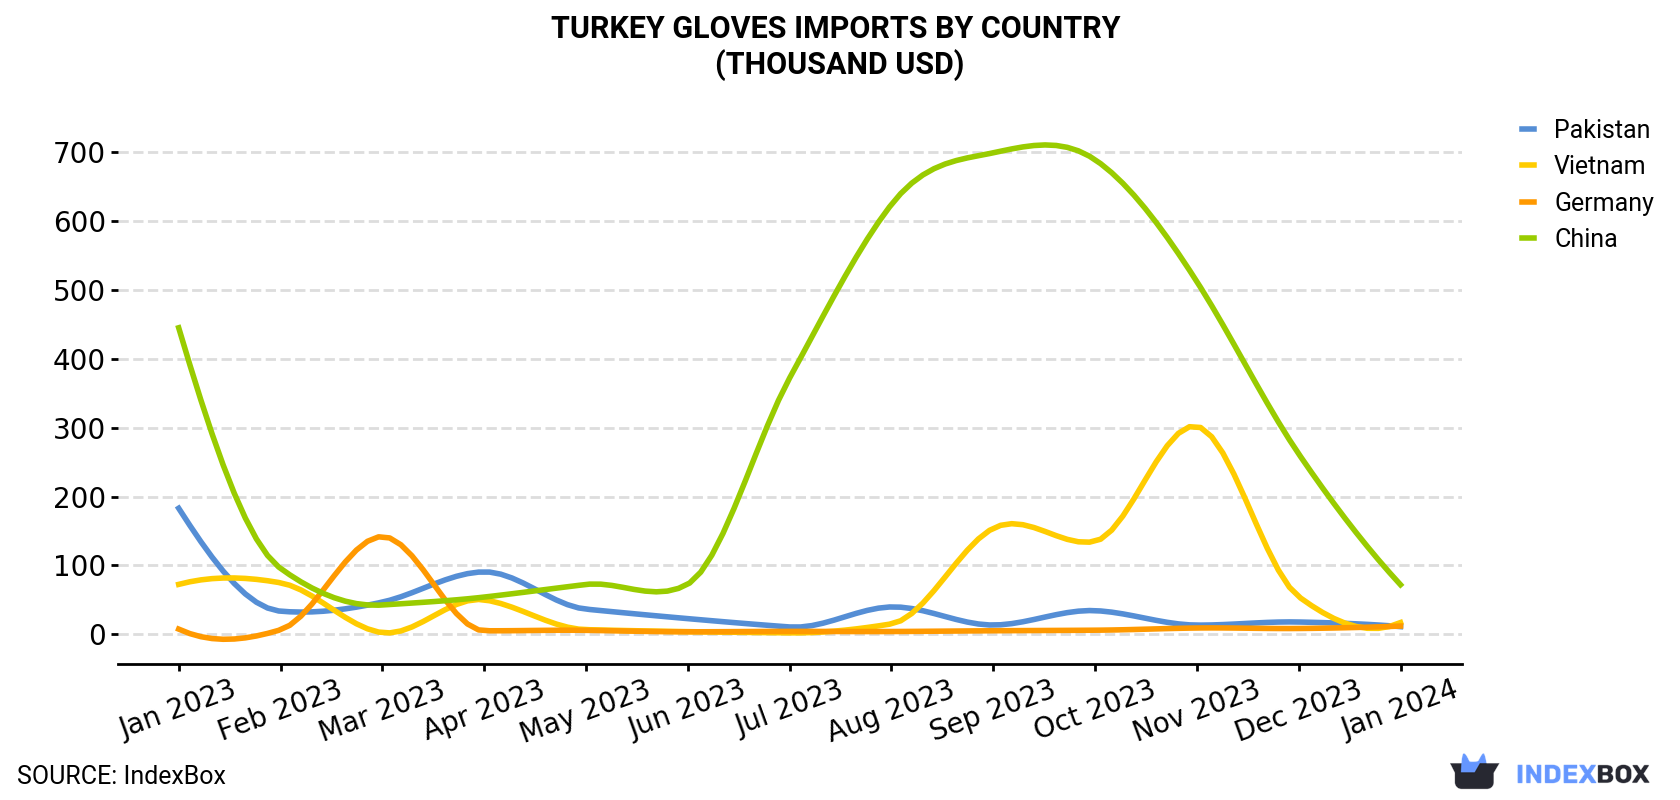 Turkey Gloves Imports By Country (Thousand USD)